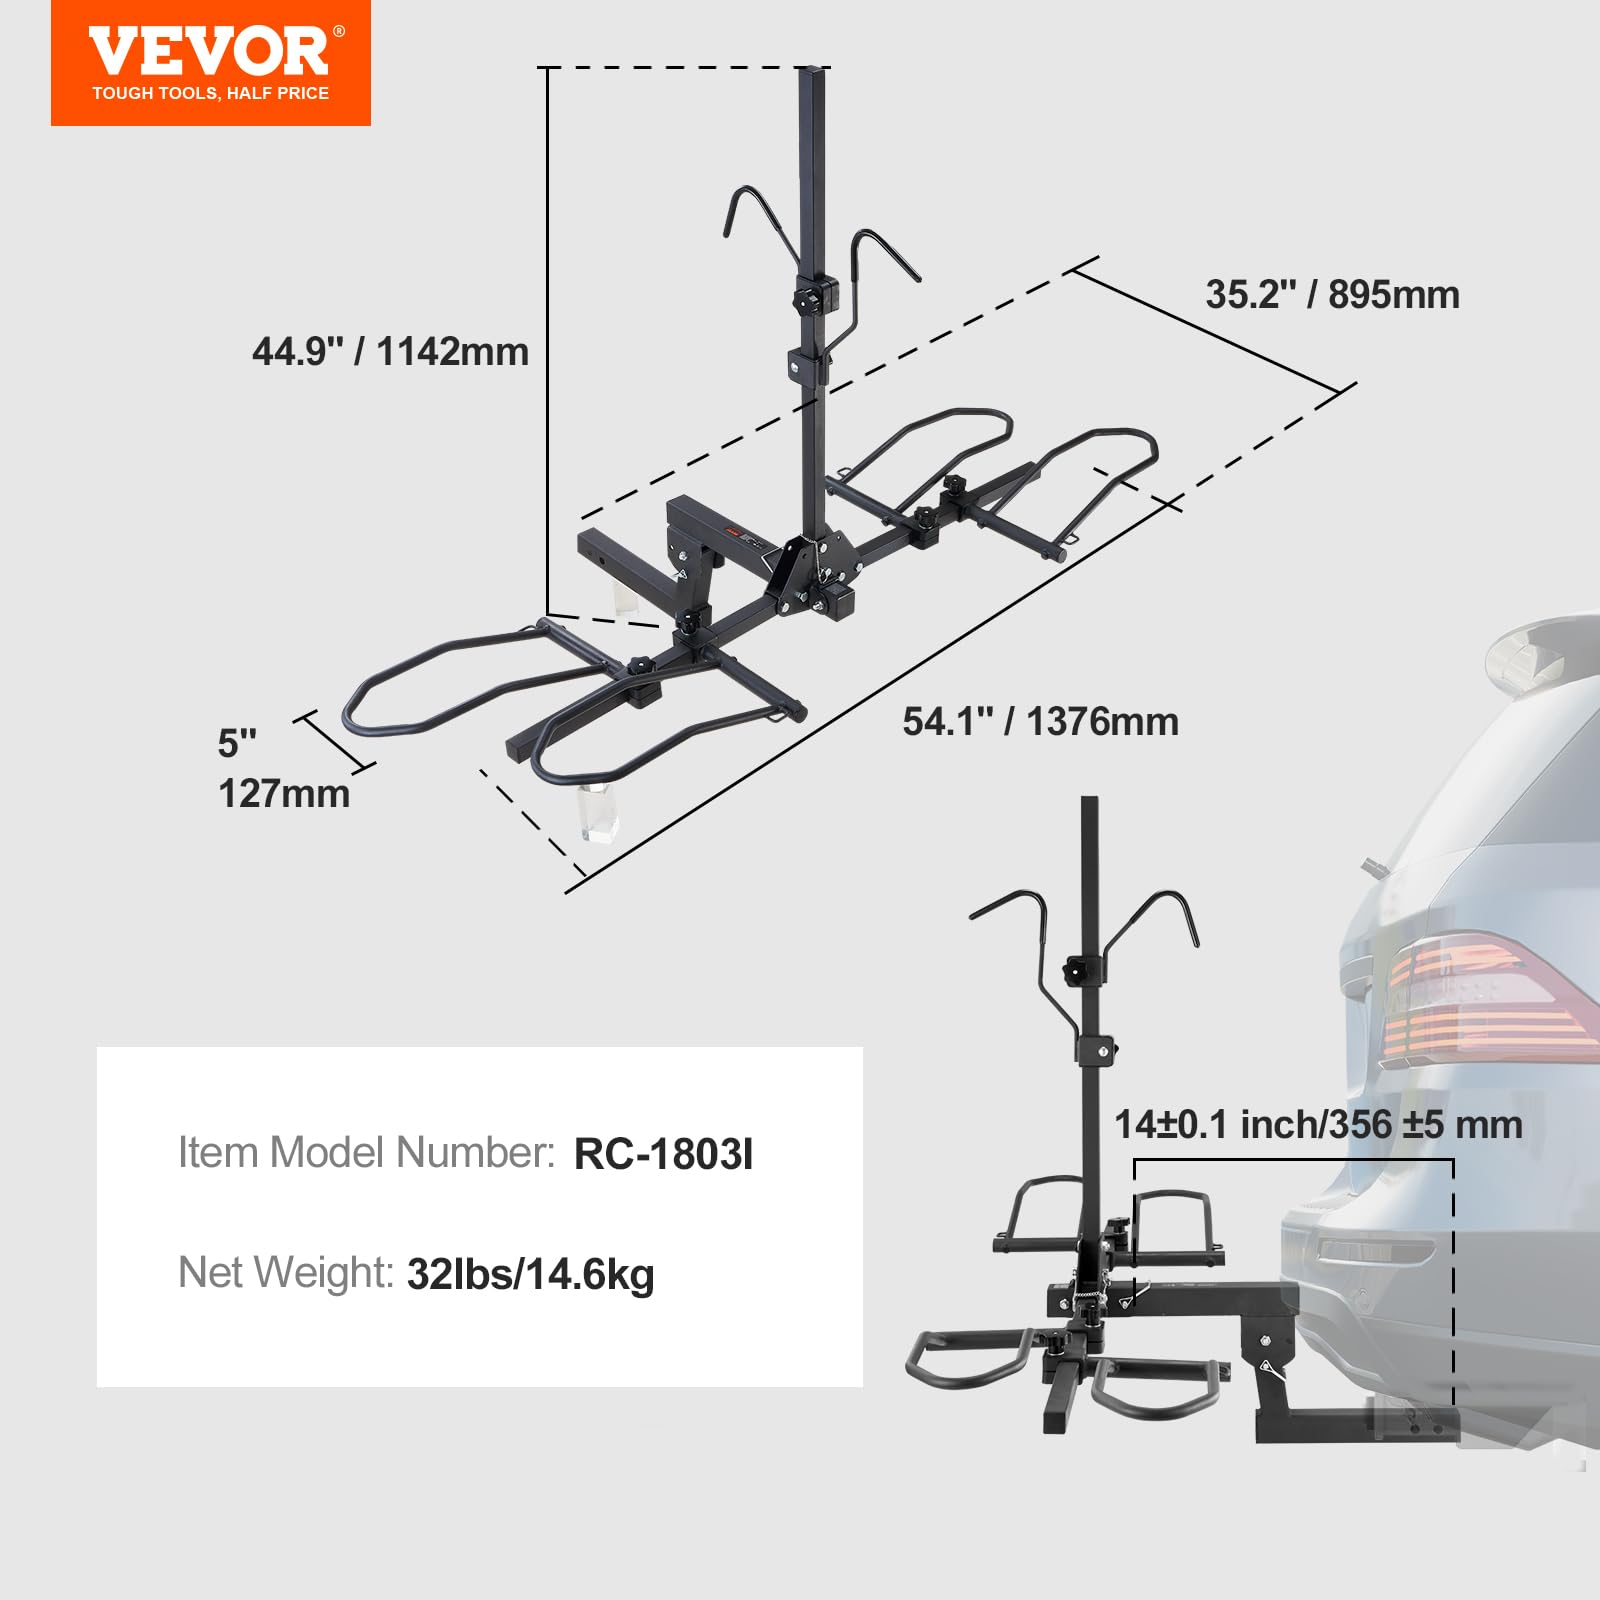 VEVOR Hitch Mount Bike Rack, 2-Bike Platform Style, 160 LBS Max Capacity Bike Rack Hitch for 2-inch Receiver, Titling and Folding Bike Carrier with Tires up to 5